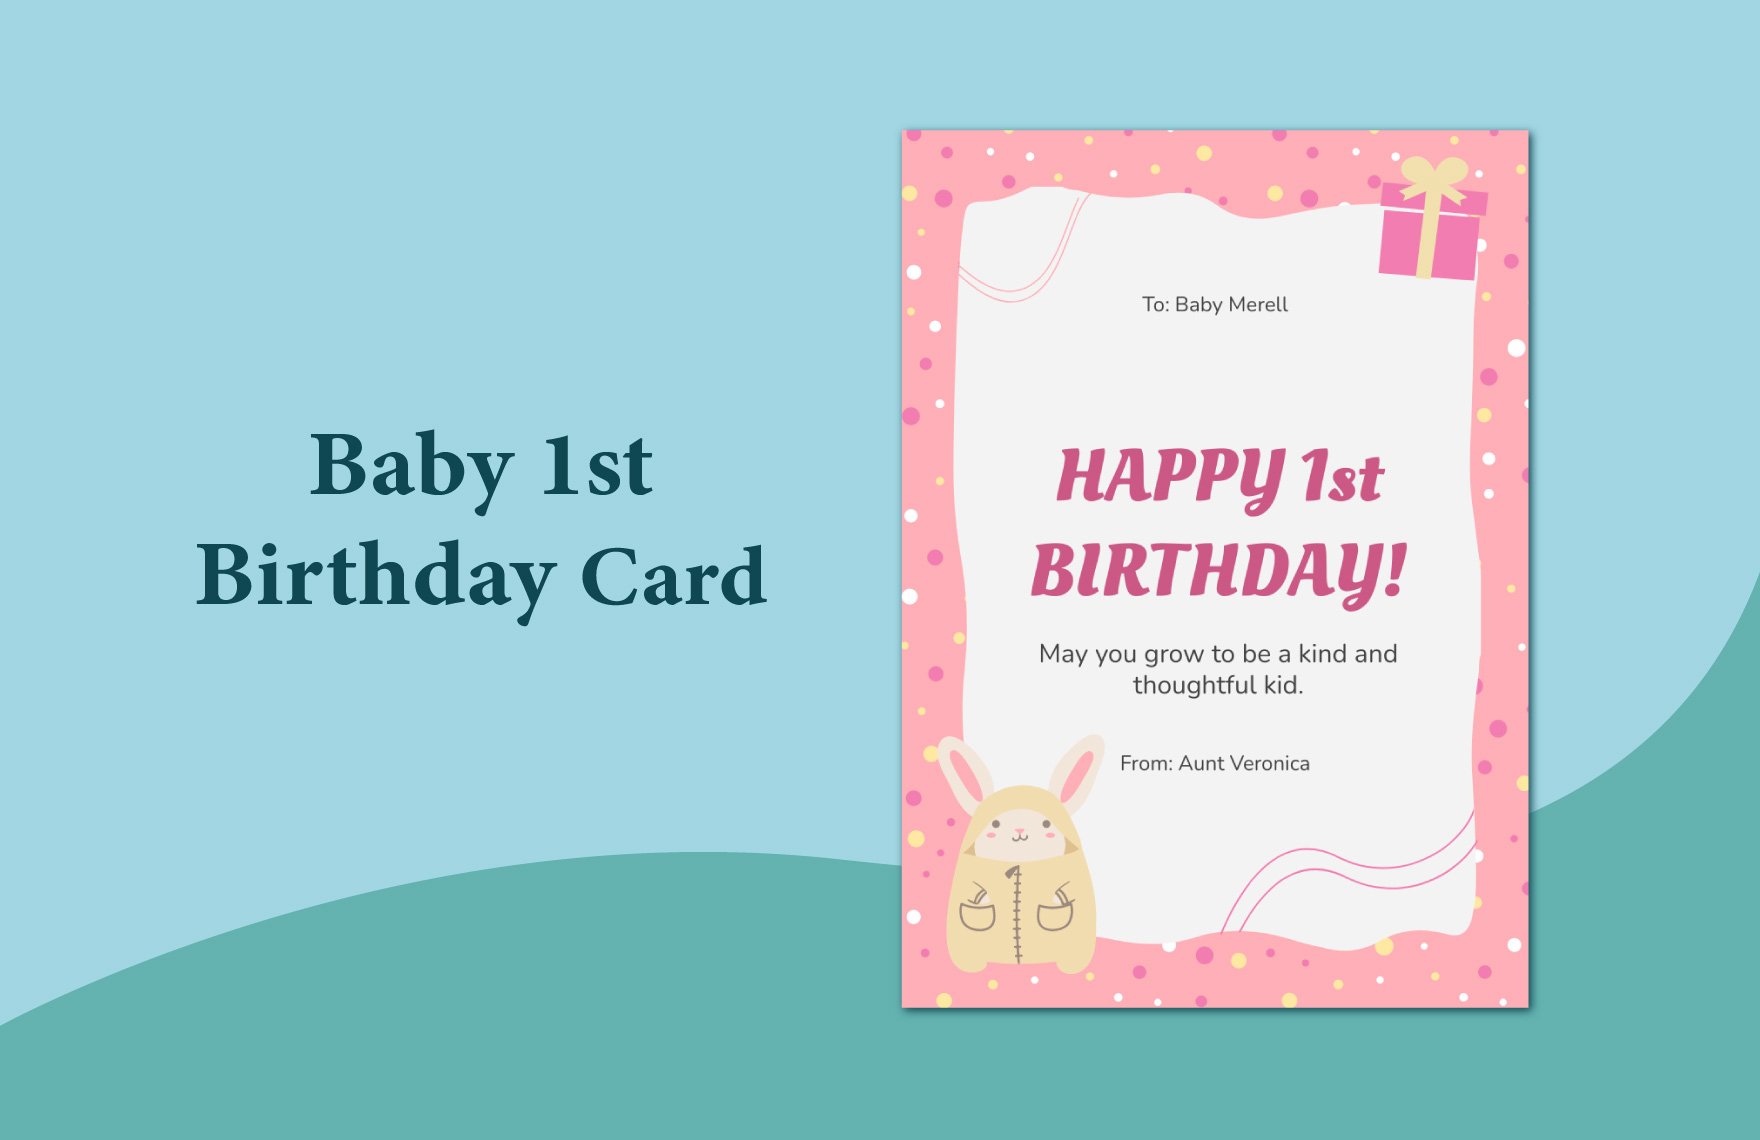 Baby 1st Birthday Card Template